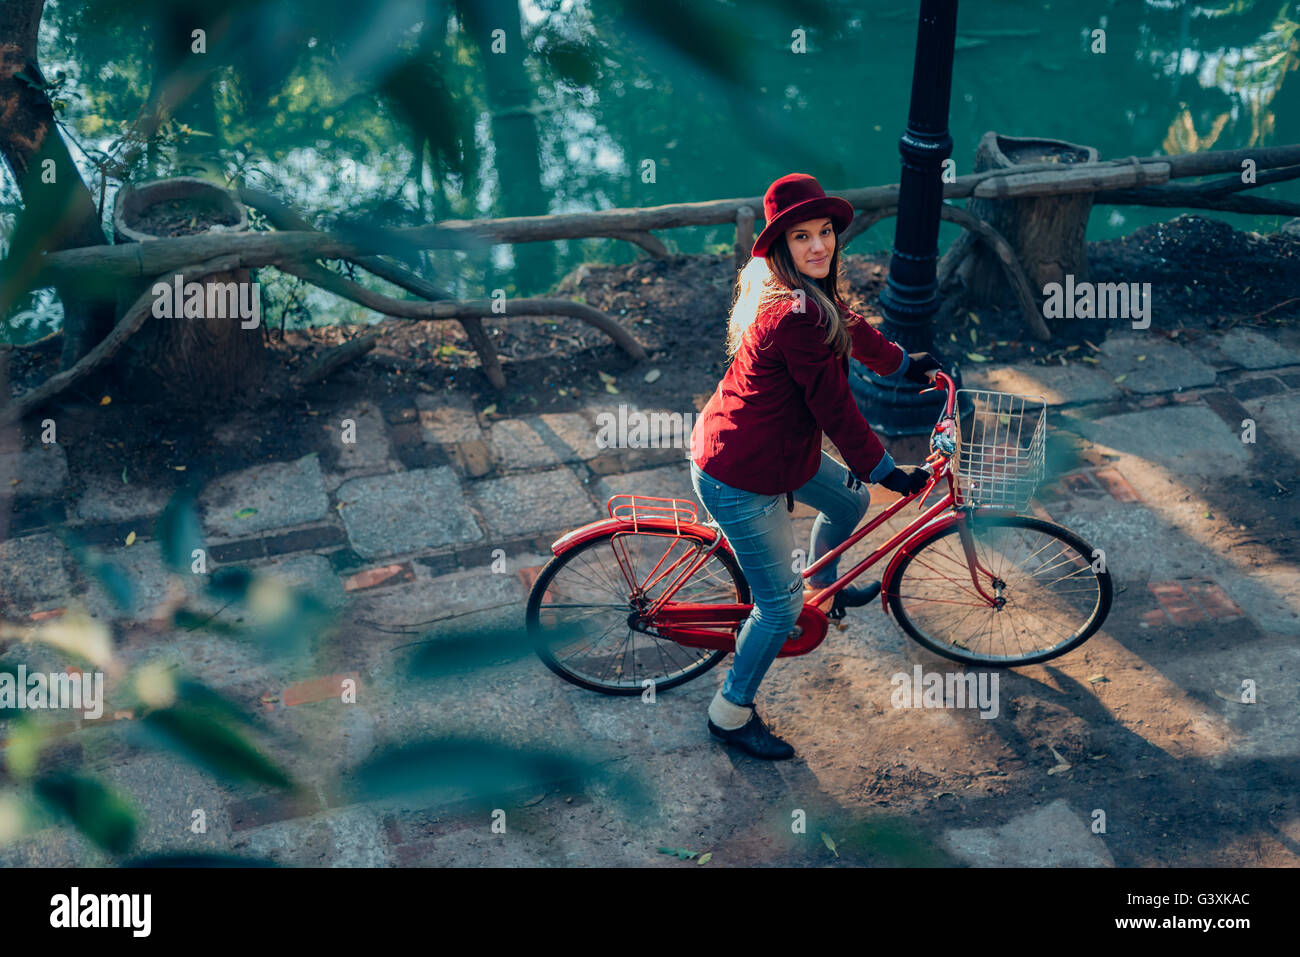 Top angle view of happy woman riding bike on park in vintage urban fashion looking at camera, nature scenery background. Stock Photo